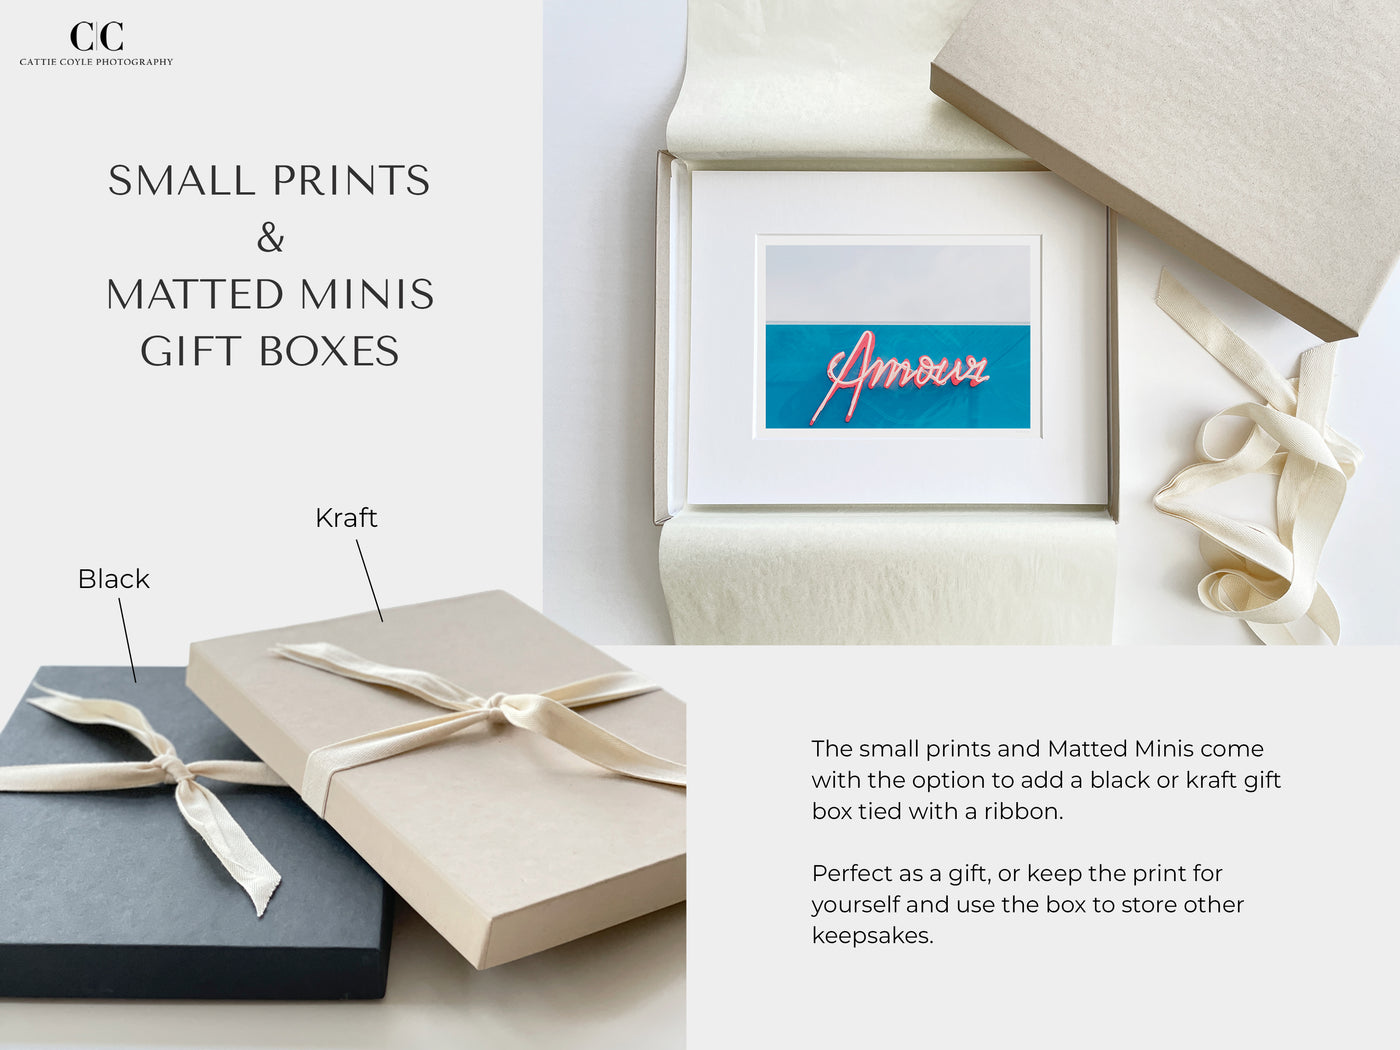 Small prints gift box colors | Cattie Coyle Photography